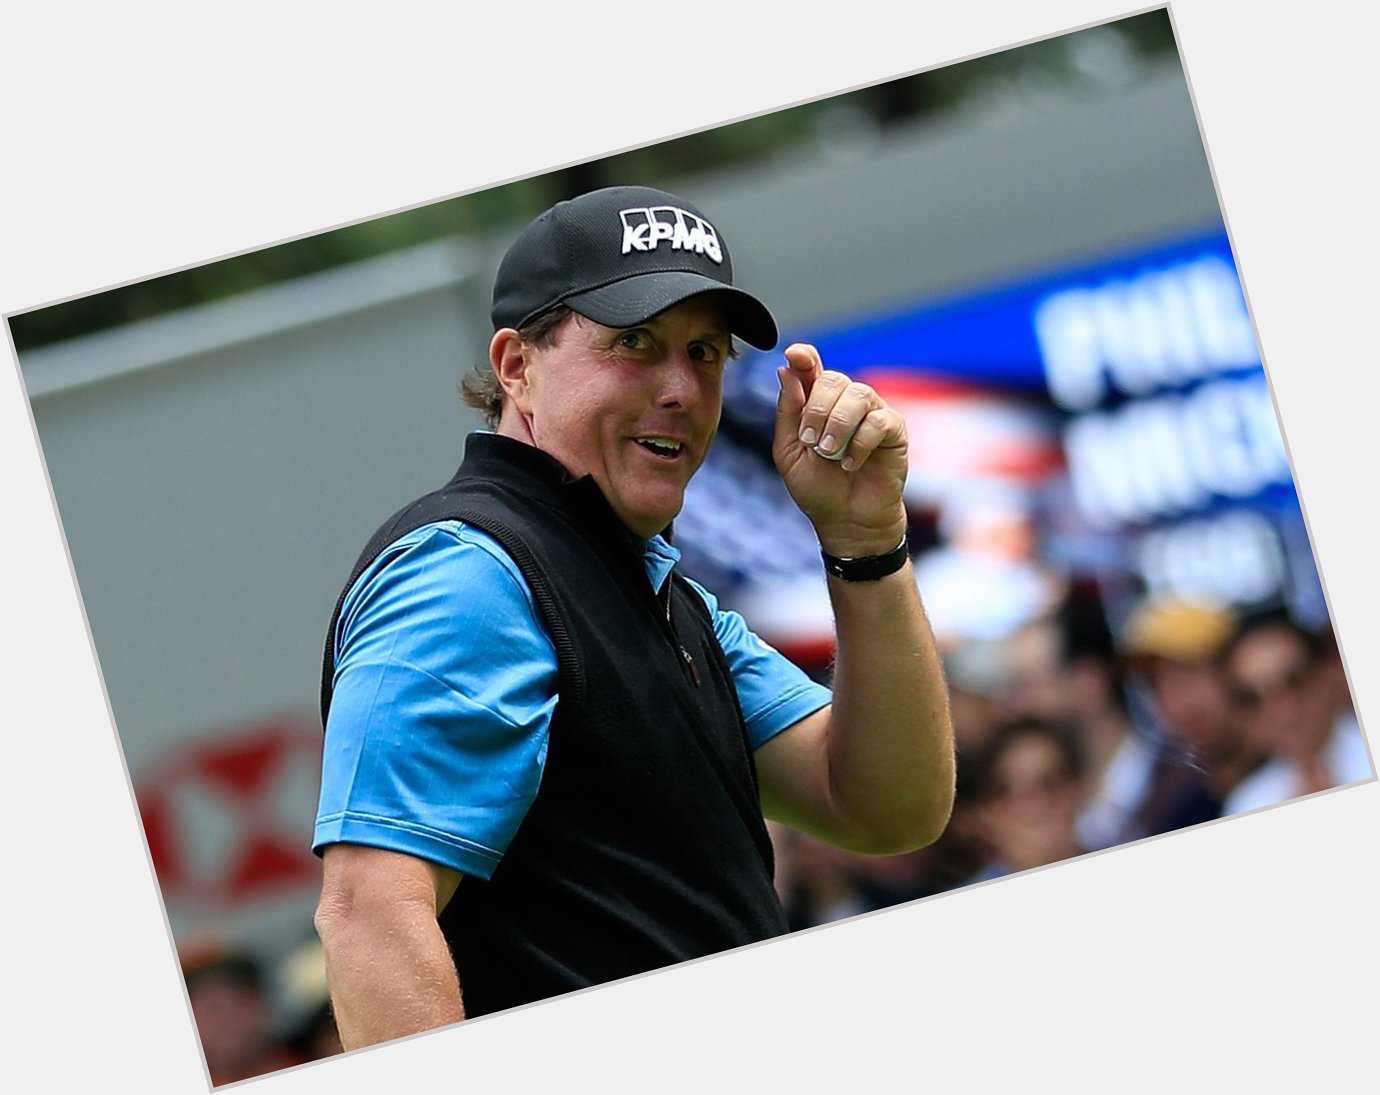 Happy Birthday, Phil!

WATCH crowds sing to the 48-year-old on his special day:   